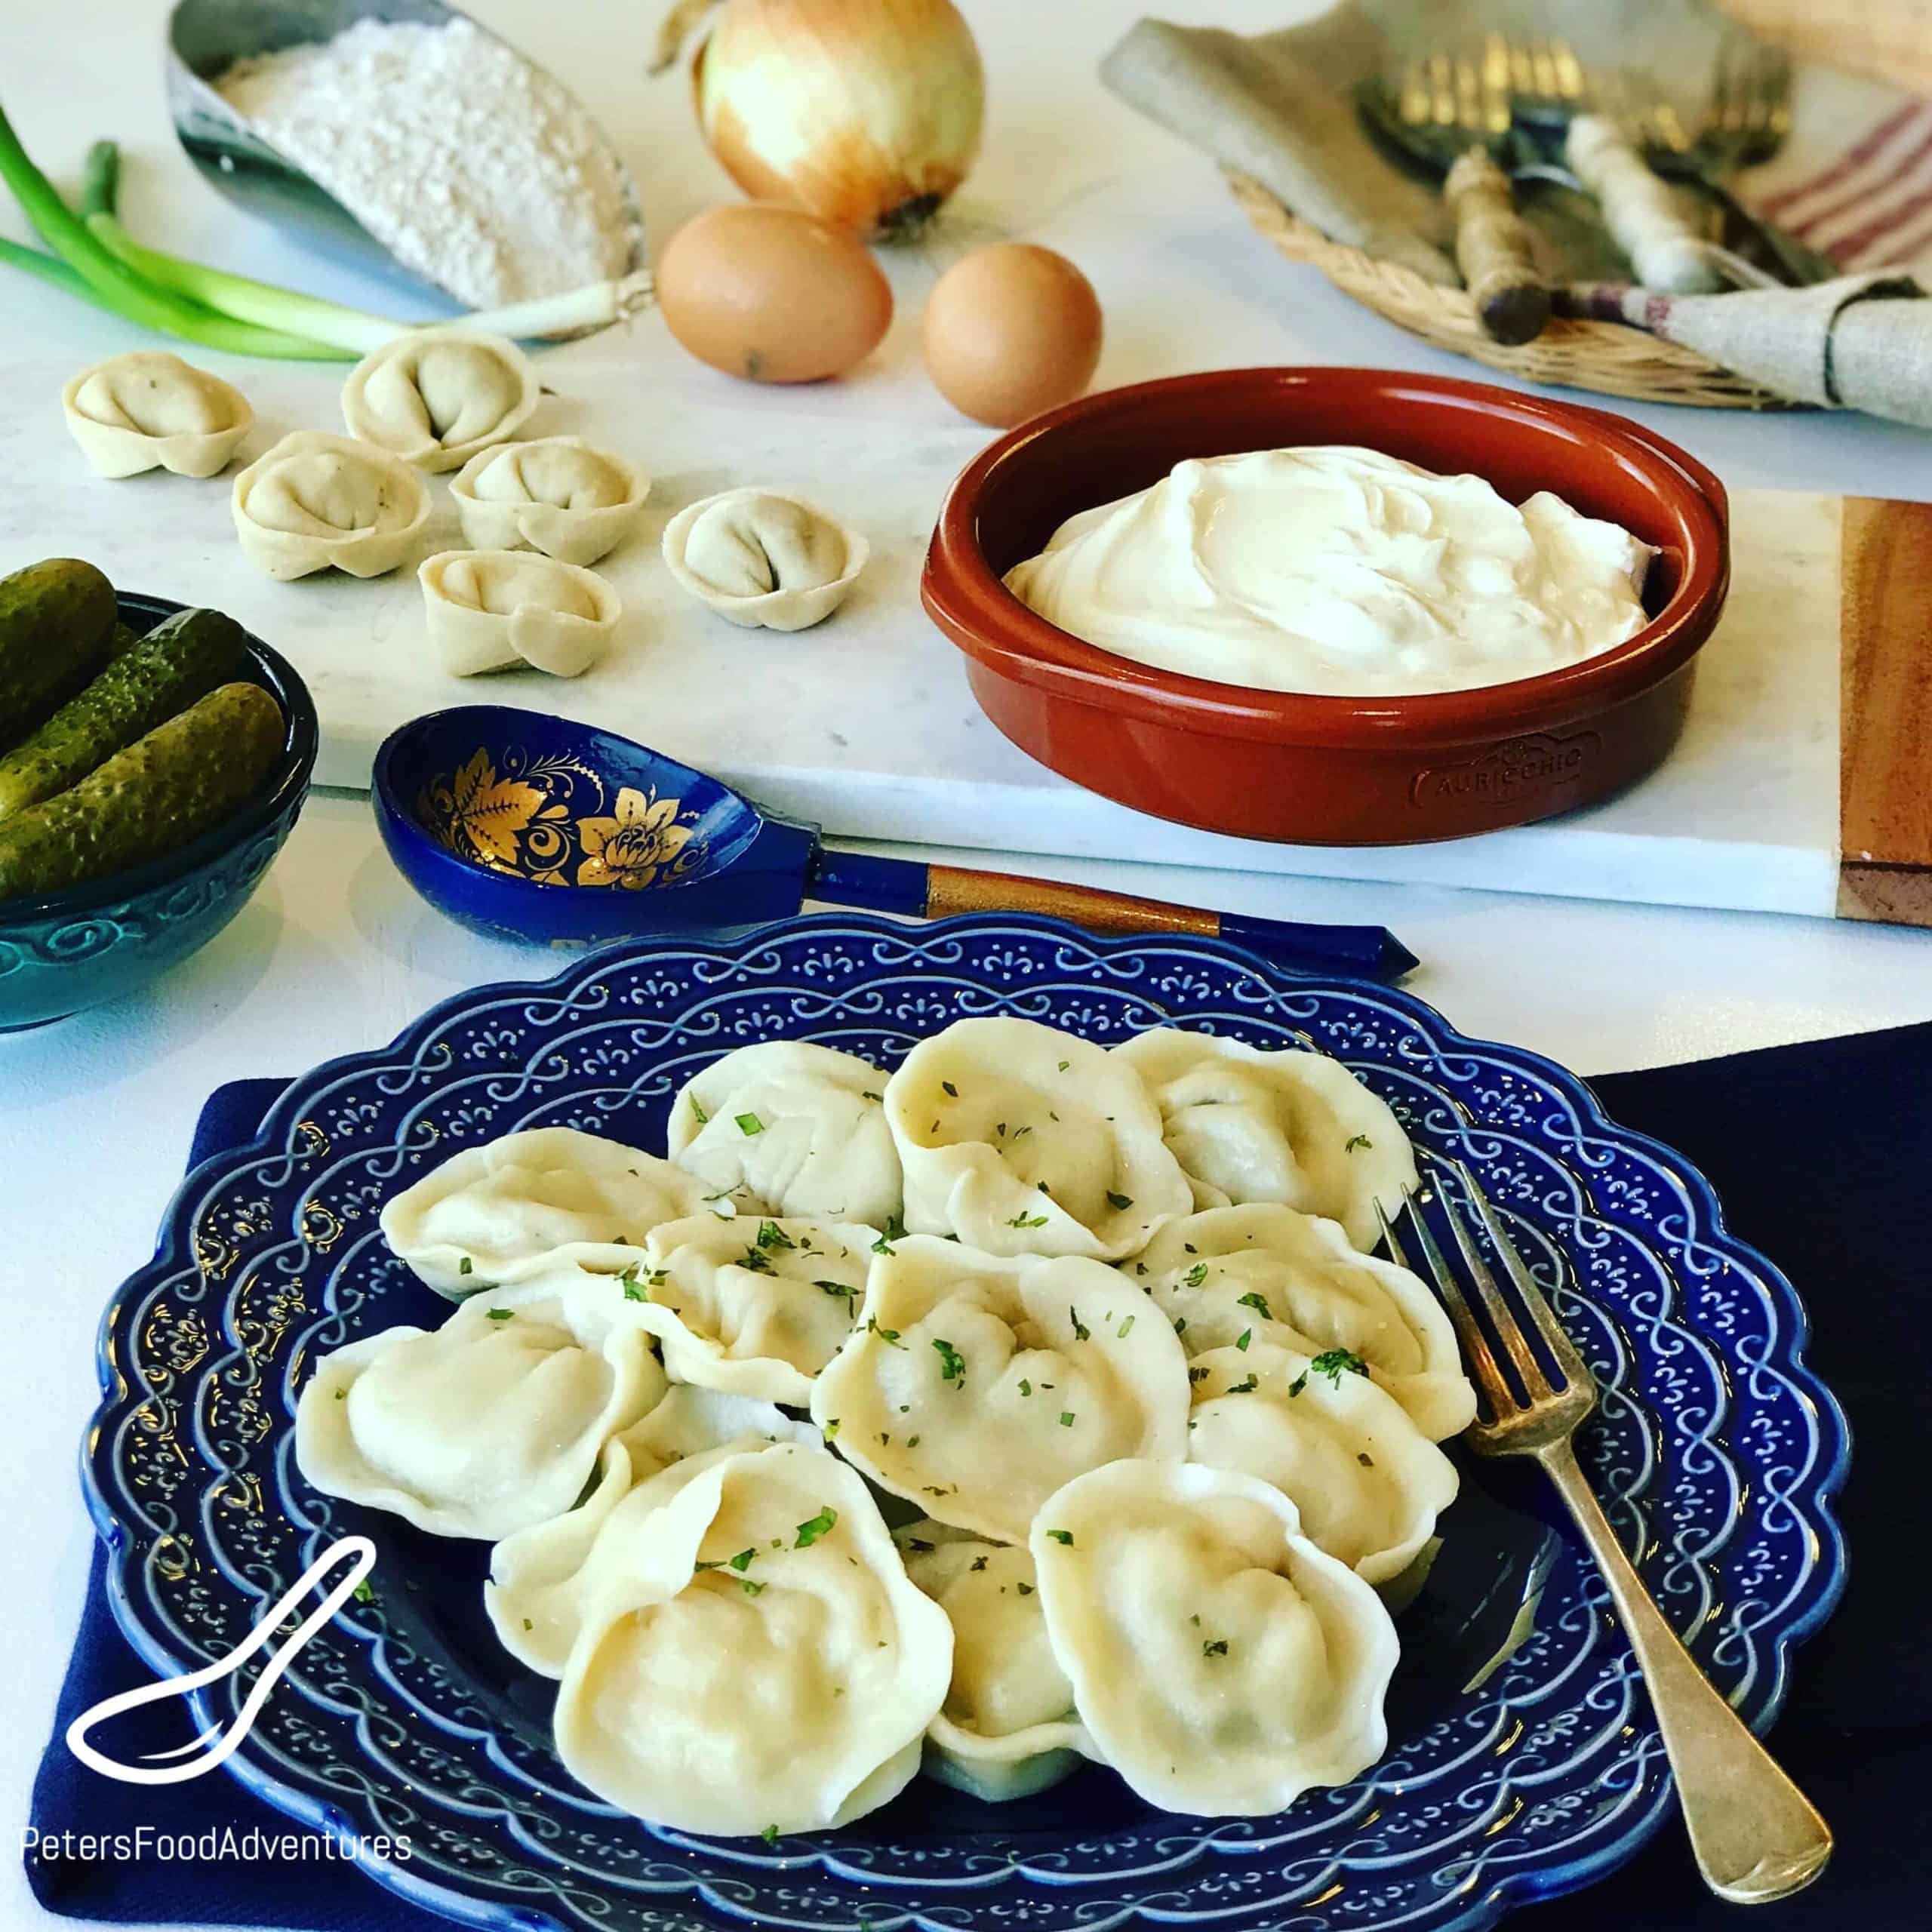 Winter is the perfect time to make Pelmeni (Пельмени). A boiled Russian dumpling made with a juicy meat filling, traditional comfort food. Pelmeni are found in every Russian's freezer, and popular in former Soviet States. Similar to Vareniki, Pierogies, Uszka, and Manti. From Russia with love.